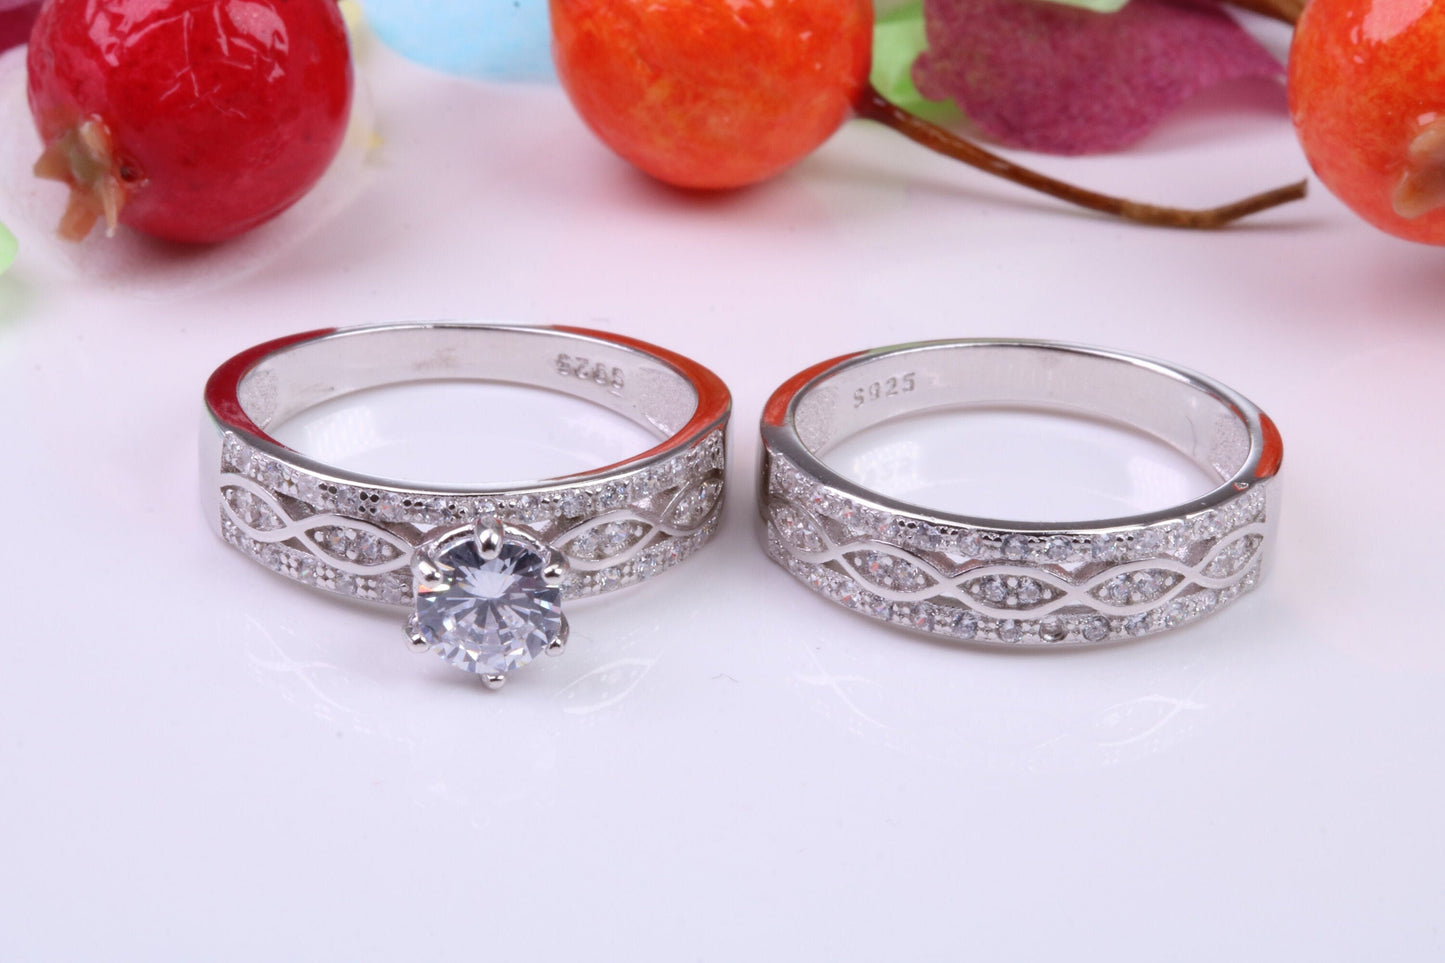 Matching Engagement and Wedding Ring, Cubic Zirconia set Rings, Made from solid Silver